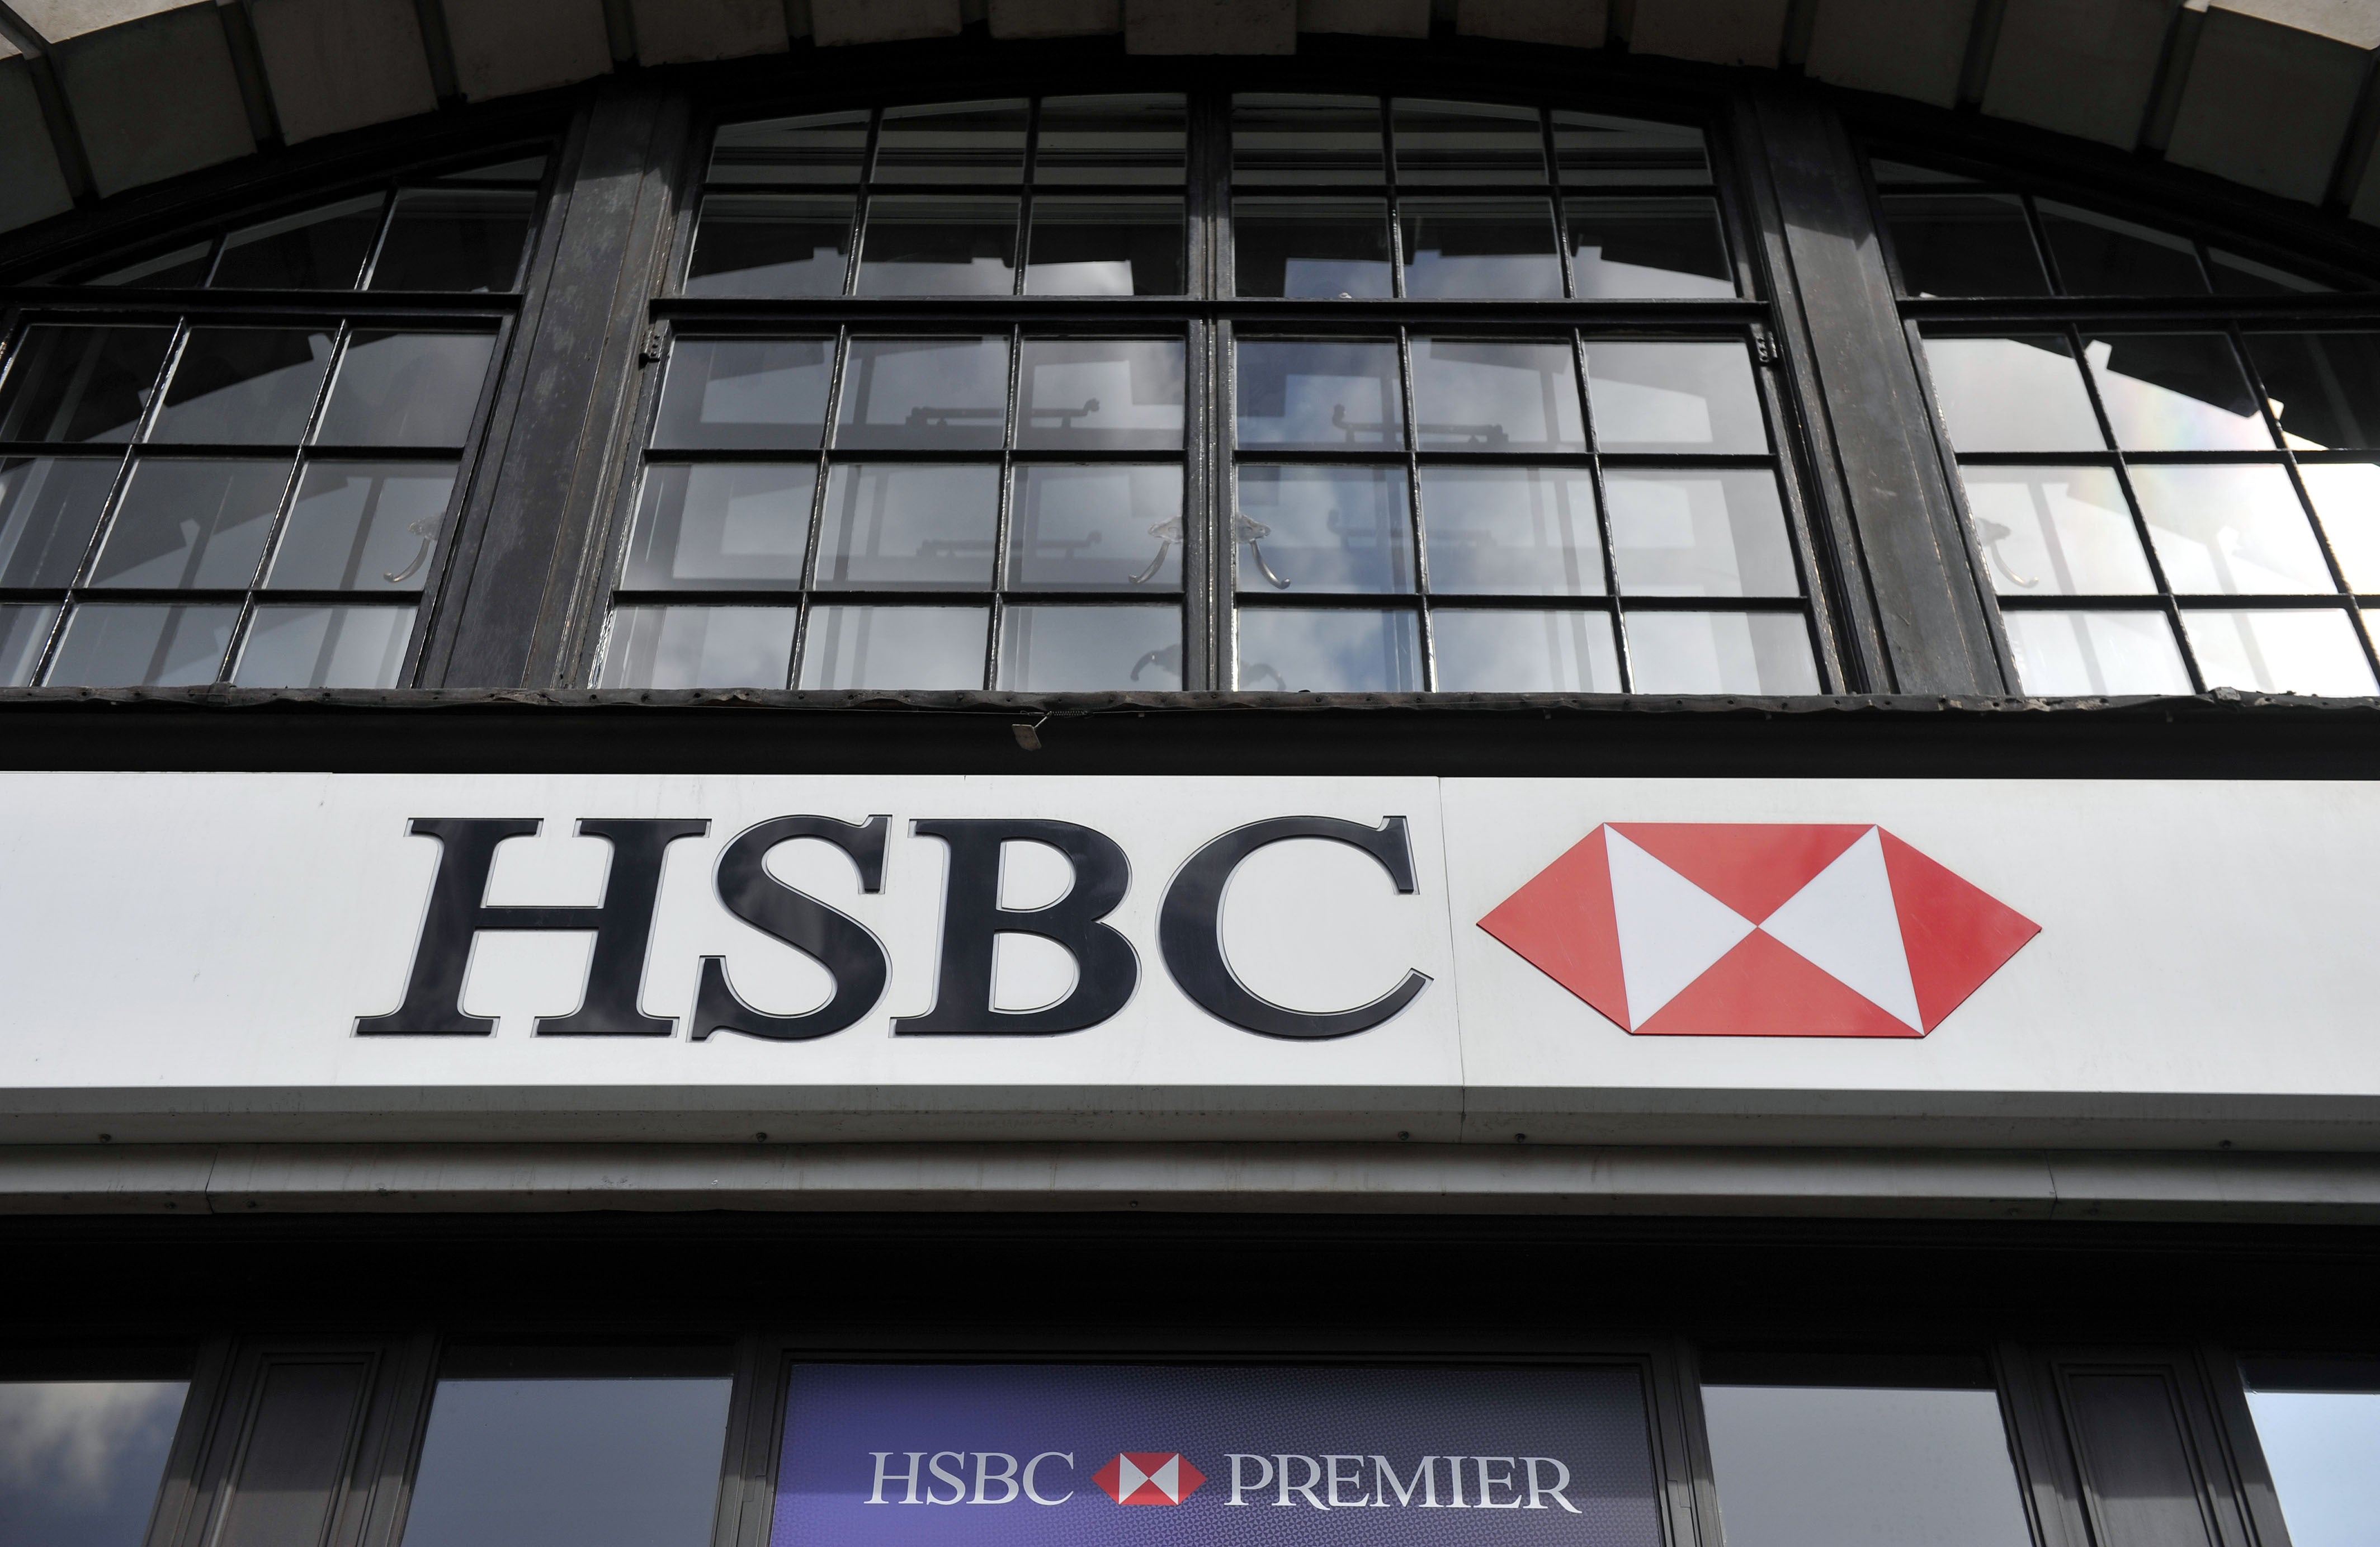 Lending giant HSBC has reportedly suspended a senior banker after he dismissed climate change warnings as ‘unsubstantiated’ and claimed central bankers have exaggerated global warming risks (PA)